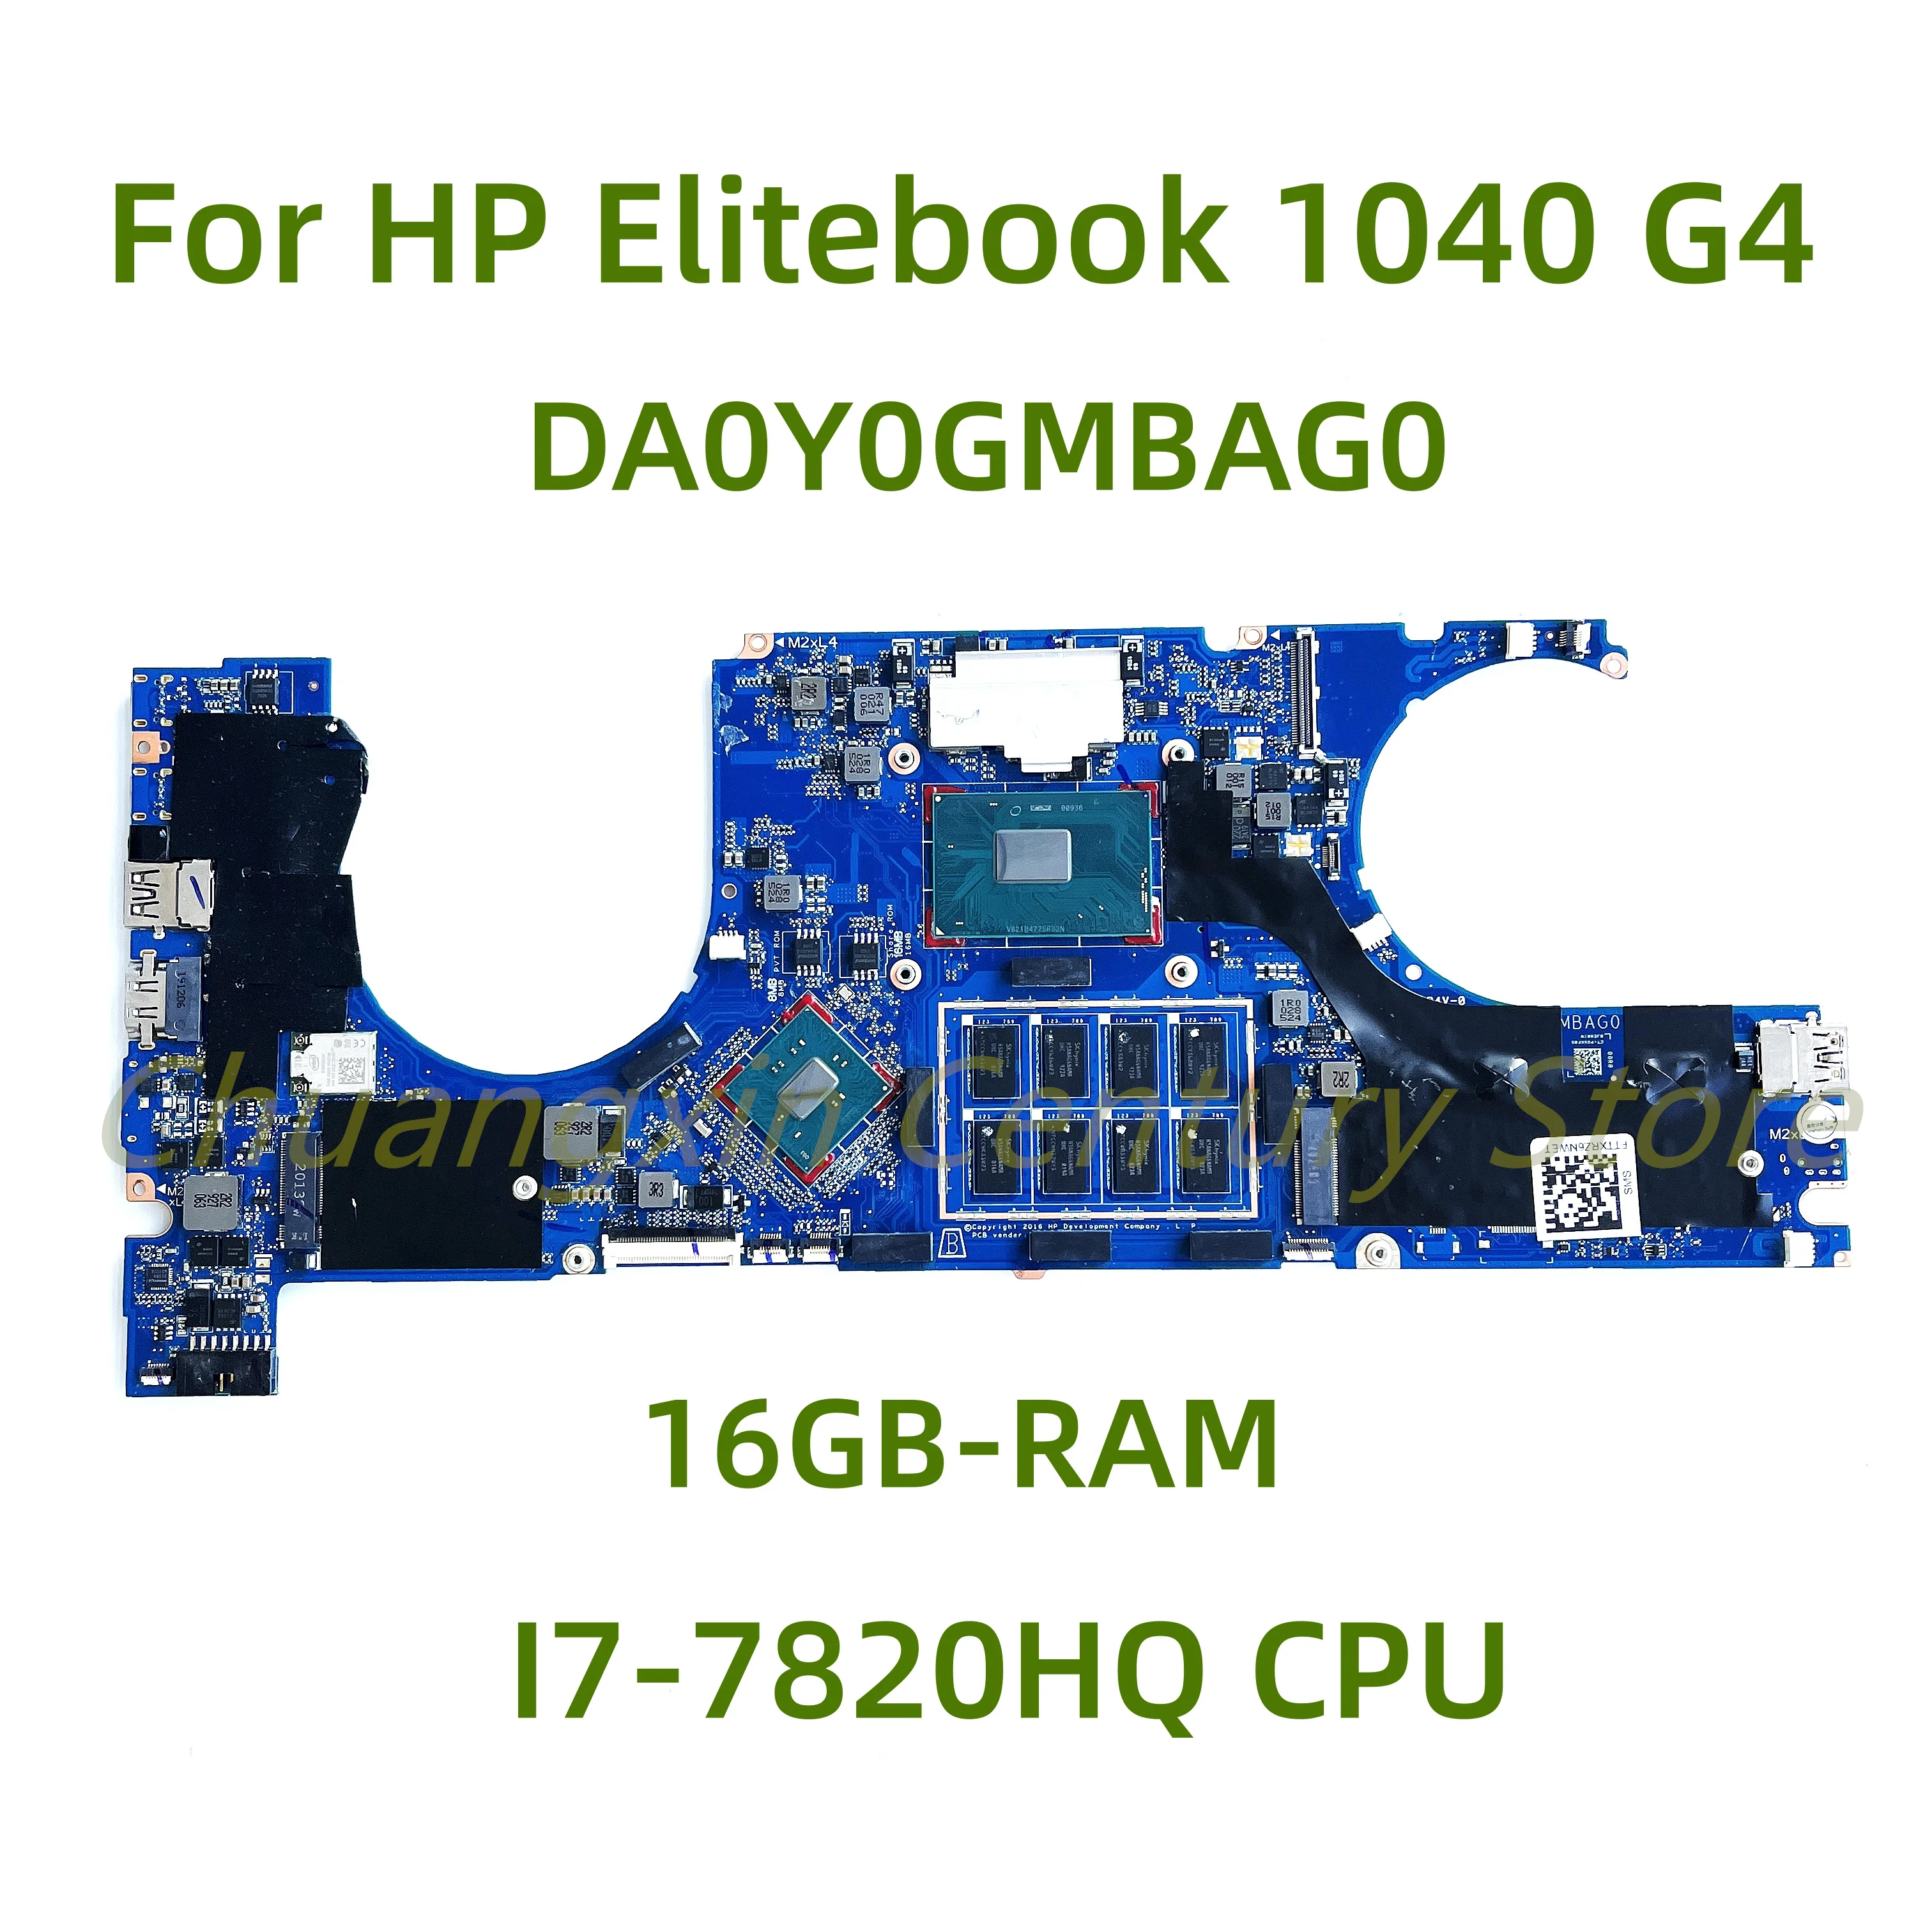 

Suitable for HP Elitebook 1040 G4 Notebook PC motherboard DA0Y0GMBAG0 with I7-7820HQ CPU 16GB-RAM 100% Tested Fully Work